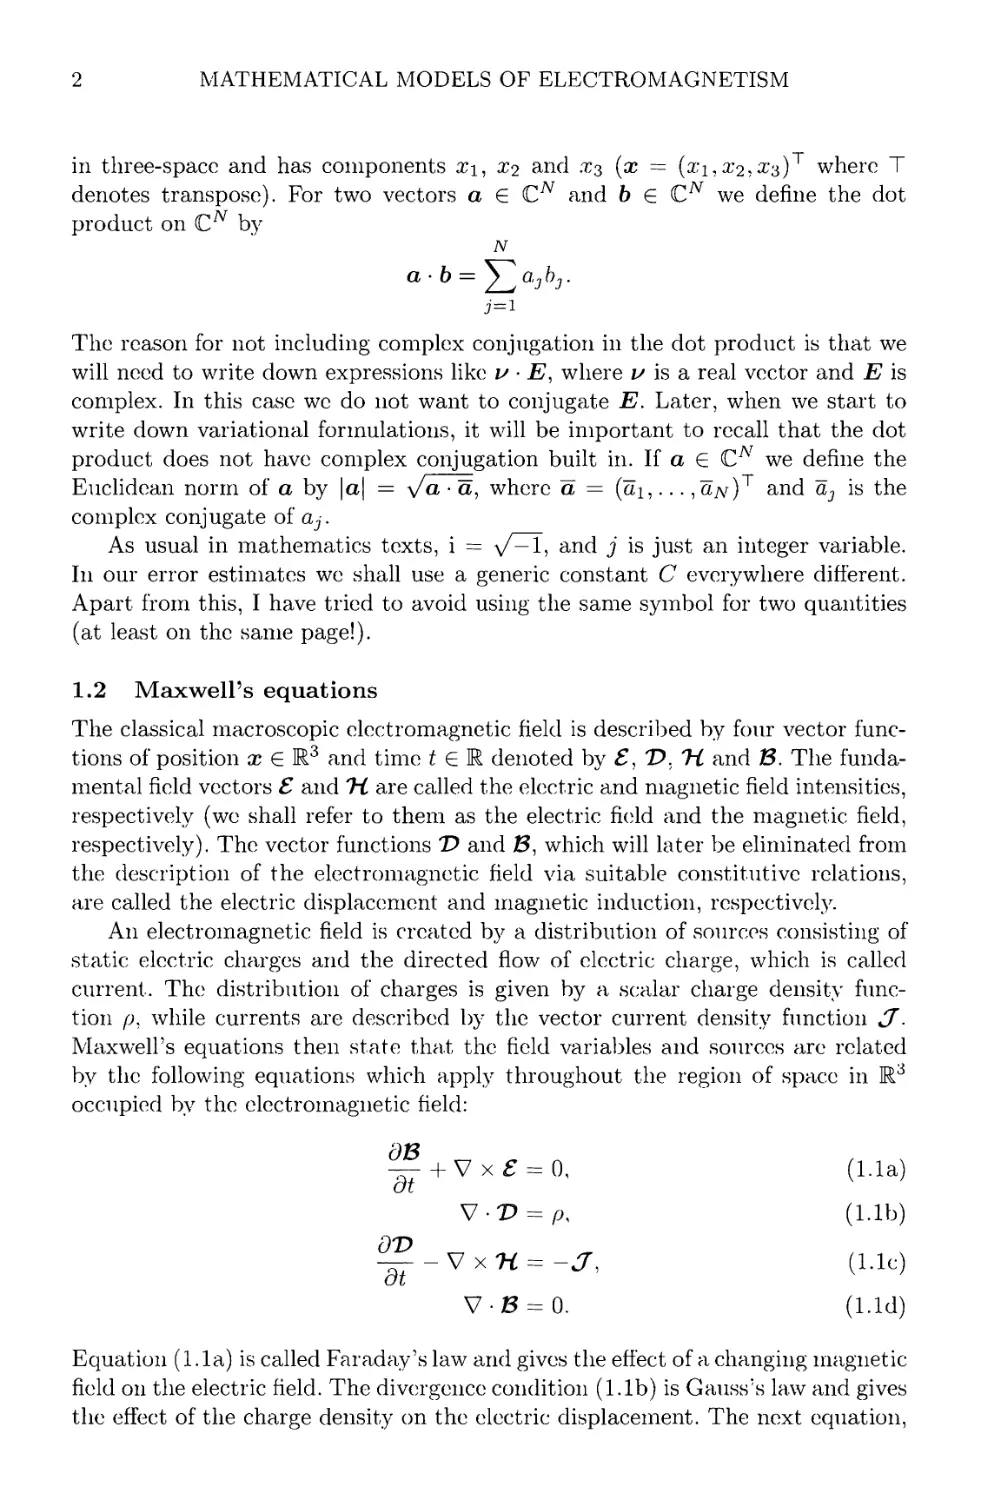 1.2 Maxwell's equations